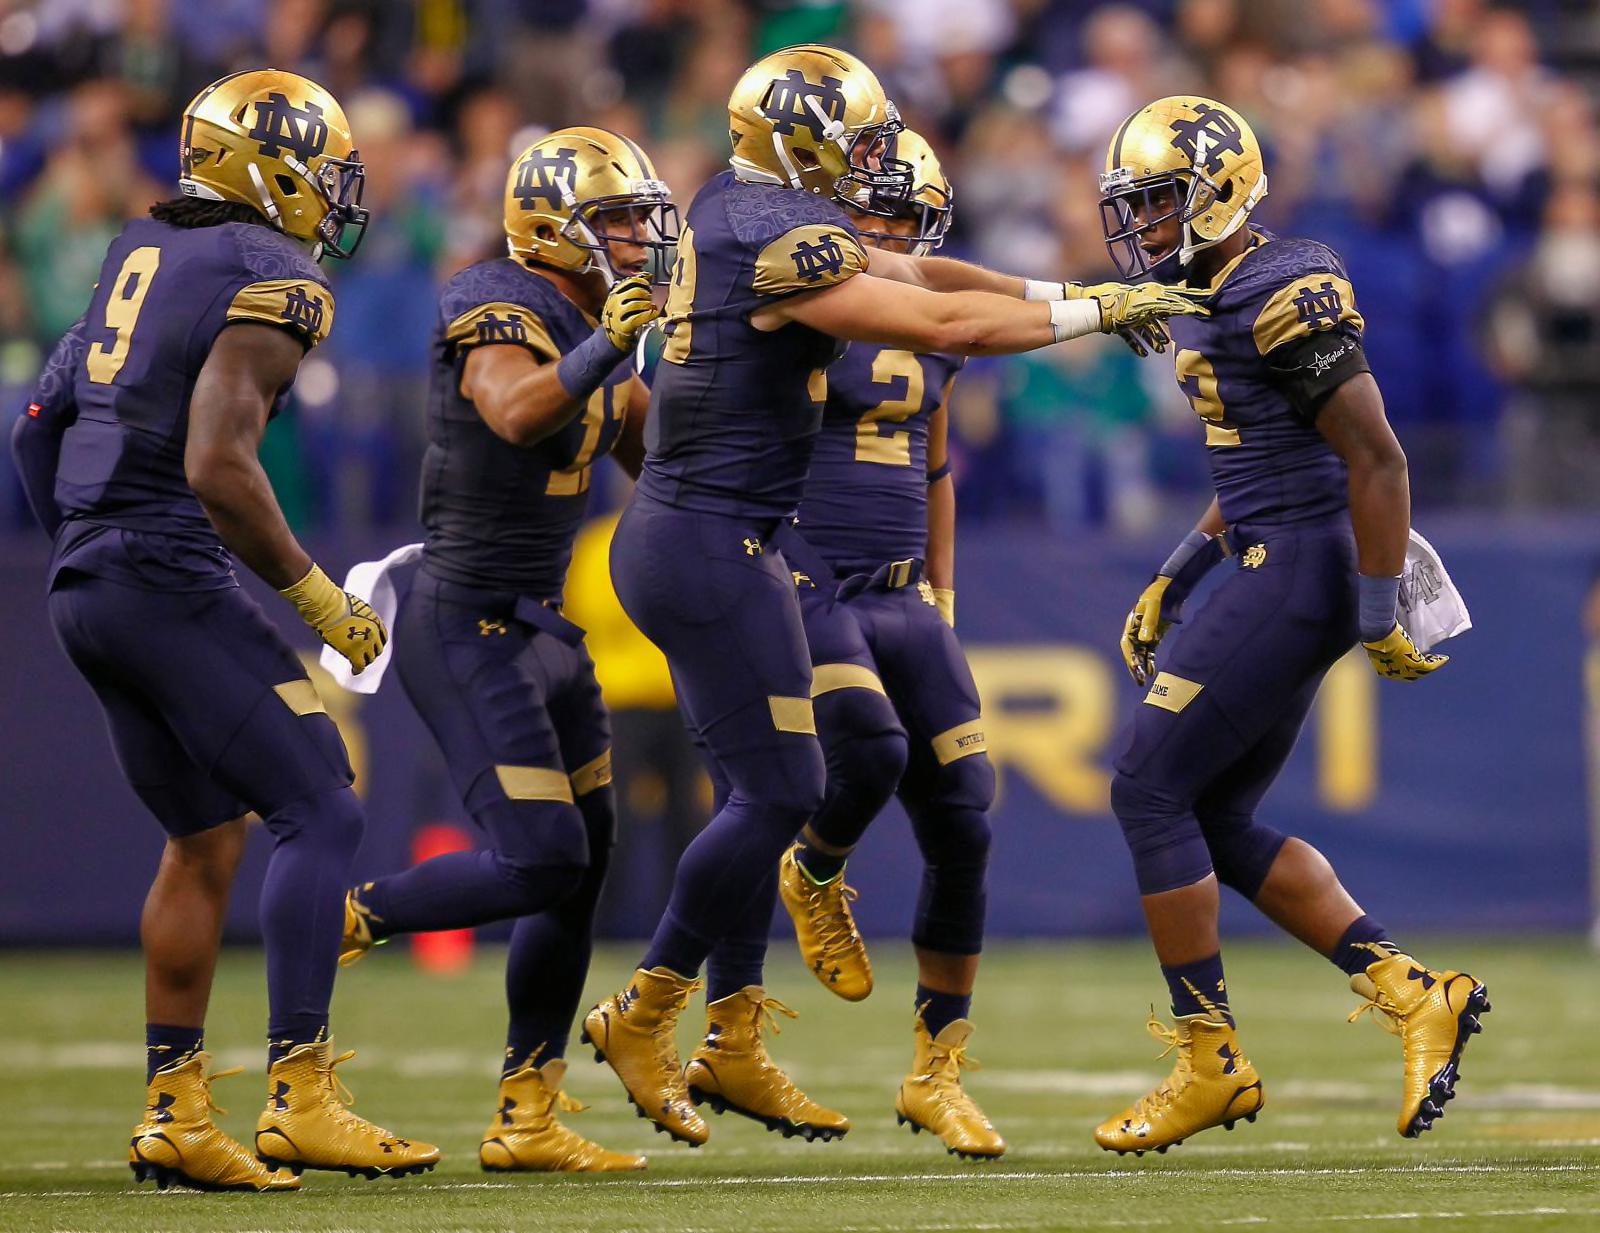 Notre Dame's Latest 'Shamrock Series' Uniform Is As Wild As Ever